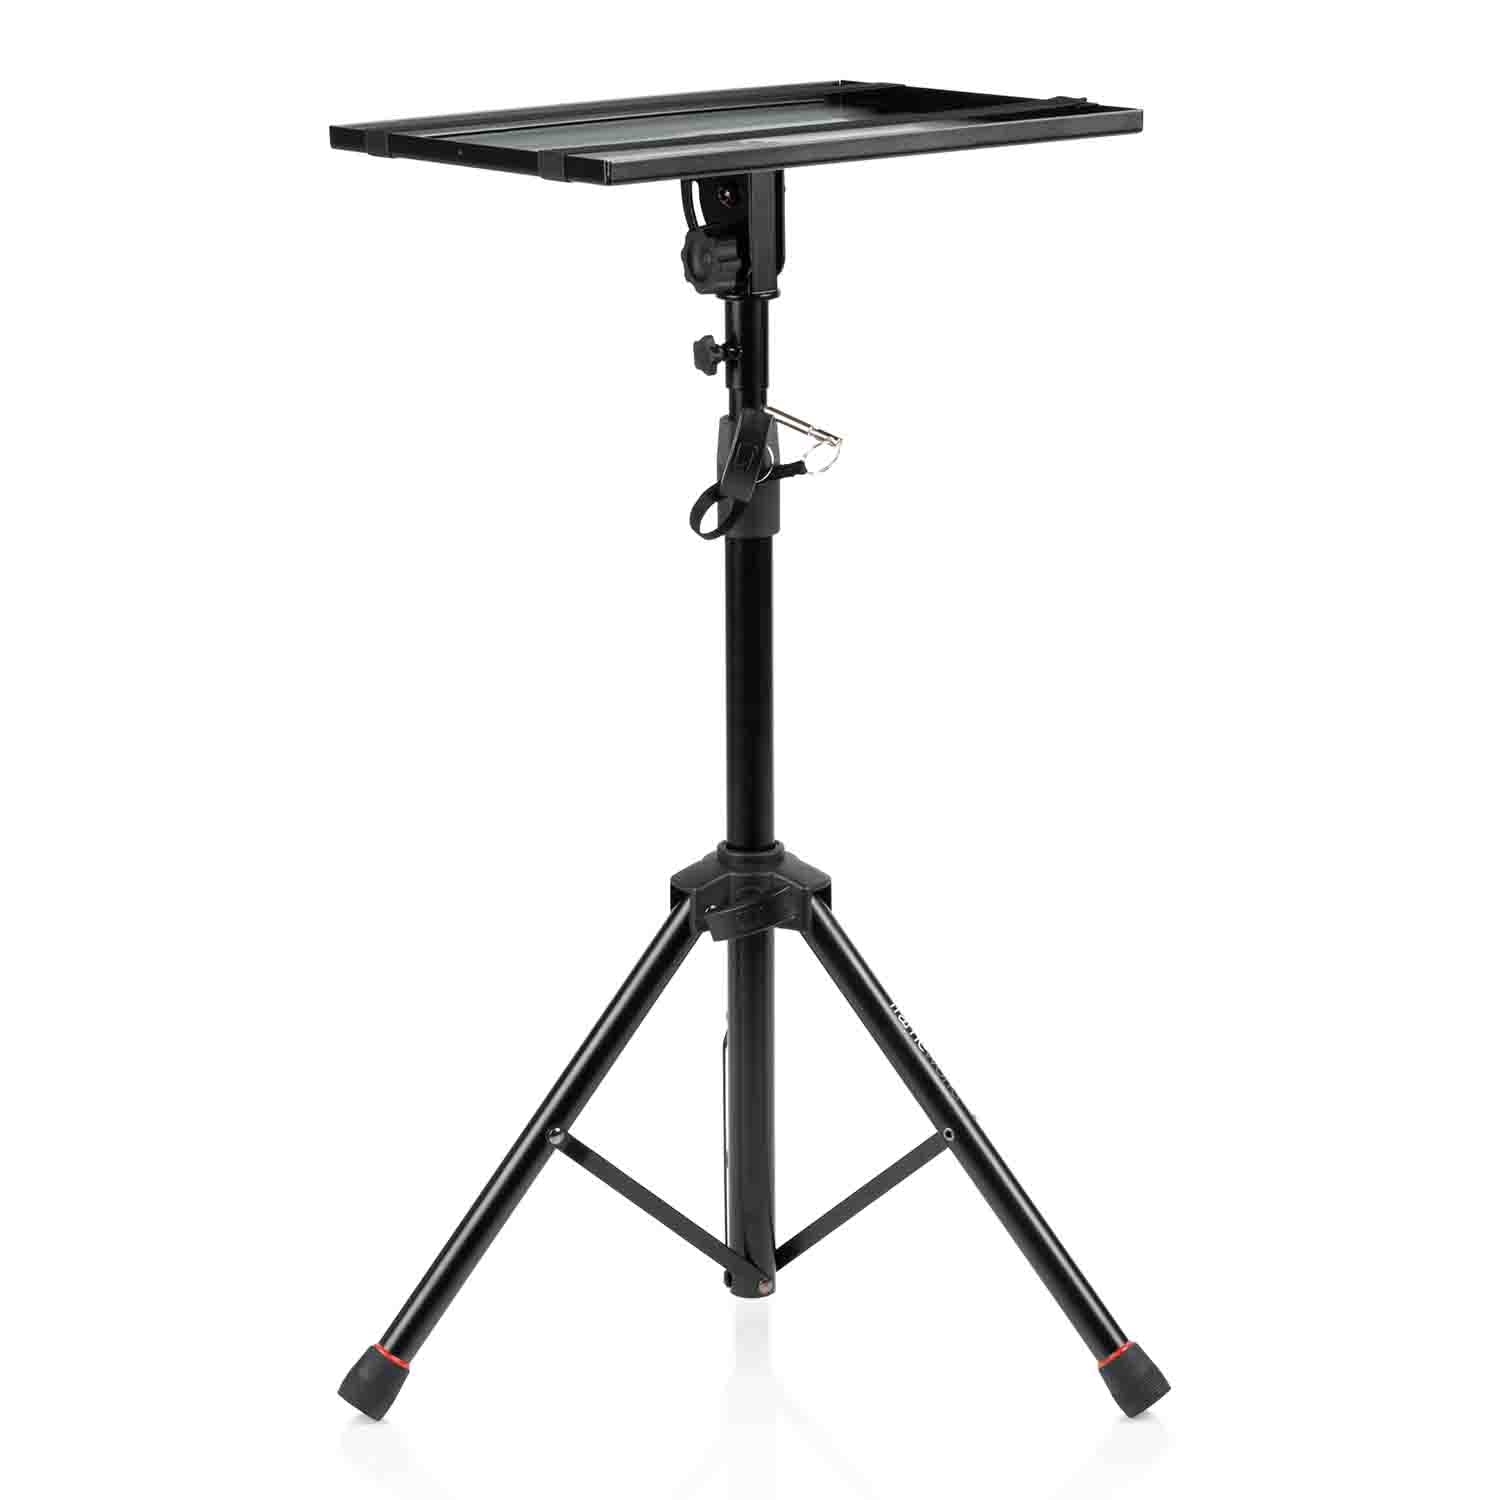 Gator Frameworks GFWLAPTOP1500 Laptop Stand - Projector Tripod Stand with Height and Tilt Adjustment - Hollywood DJ